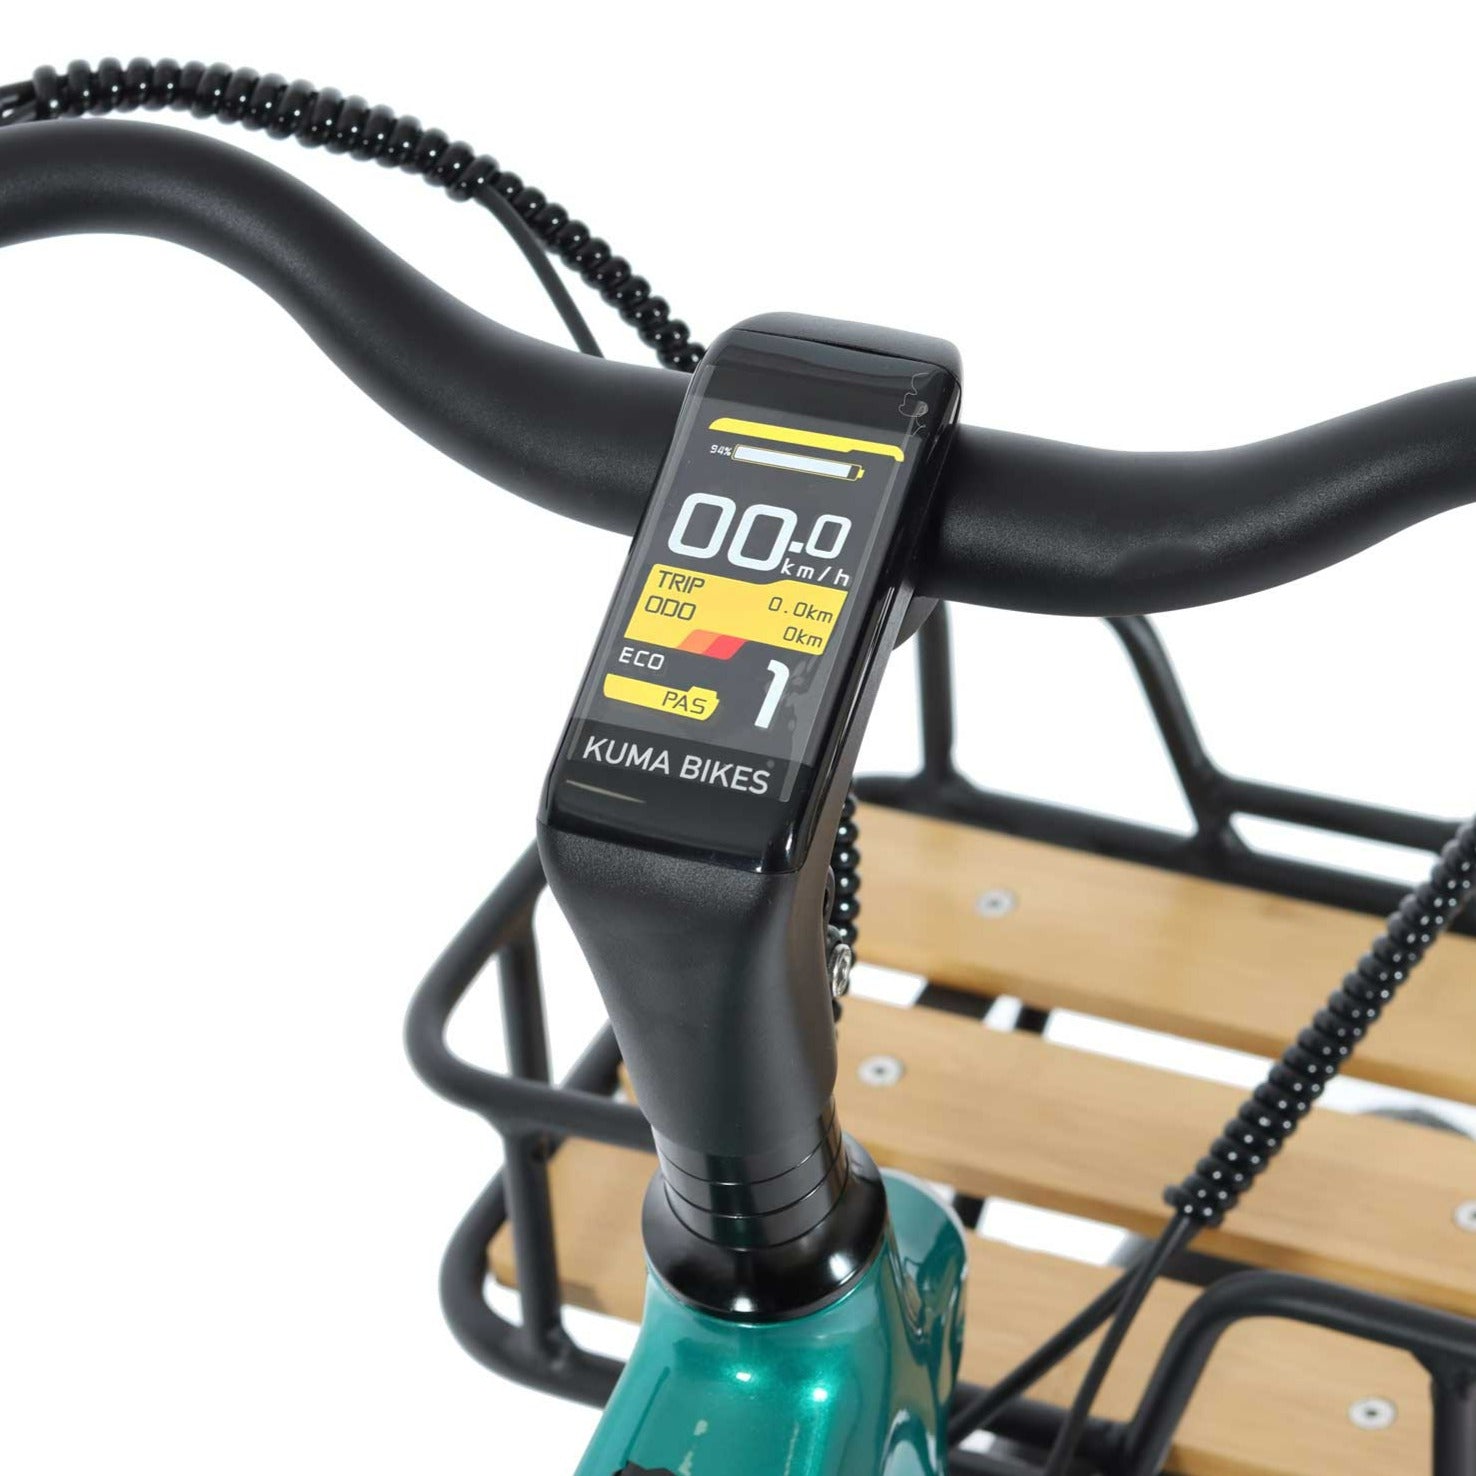 A close-up photo showing the detail of the LCD display on the Kuma S2 electric bike. The frame colour is Emerald Green..